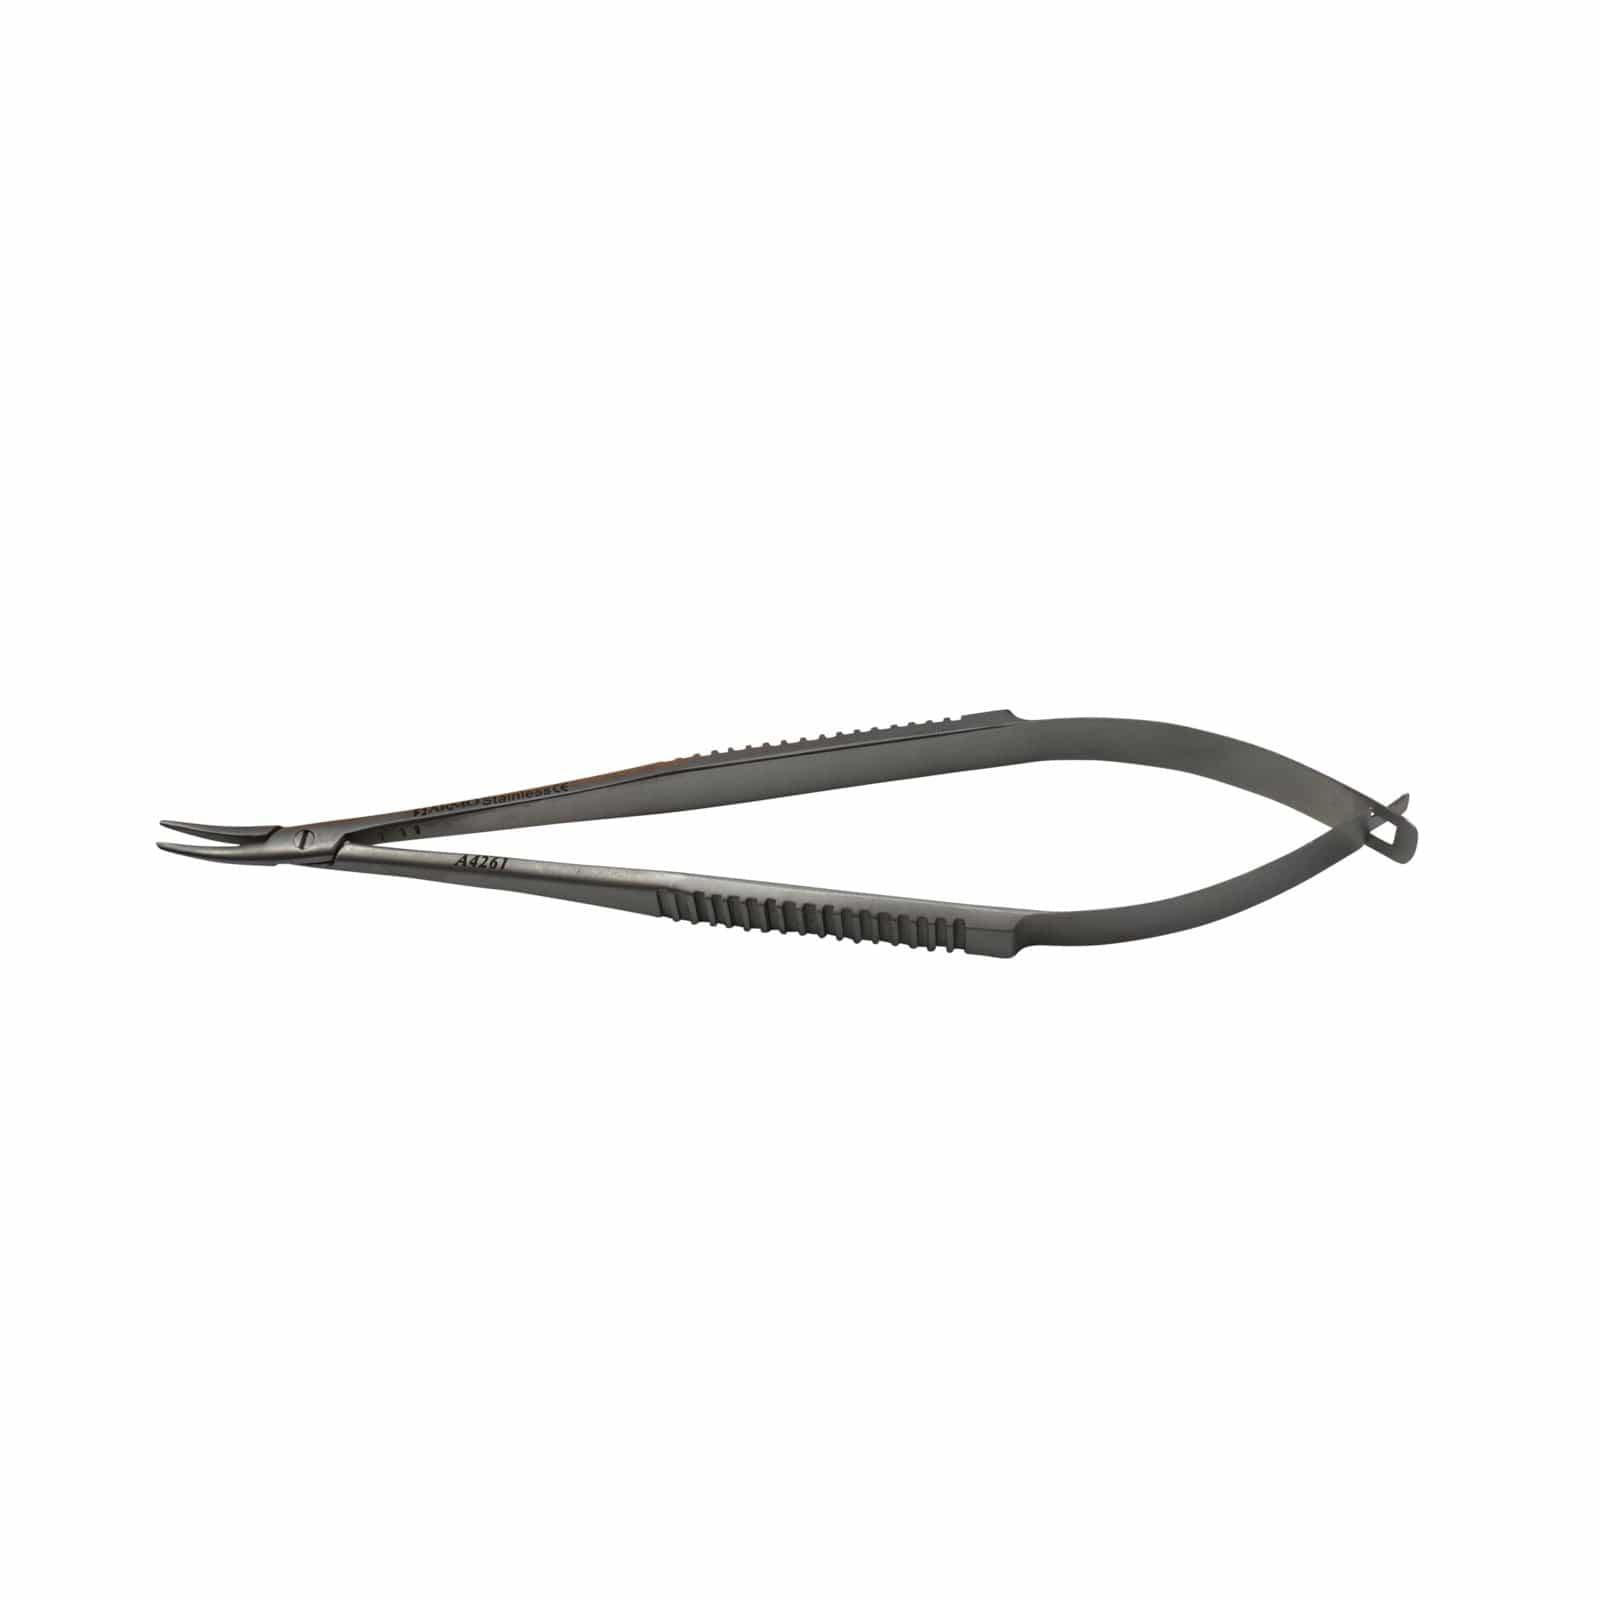 Armo Surgical Instruments 13.5cm / Curved / Standard Armo Castroviejo Needle Holder